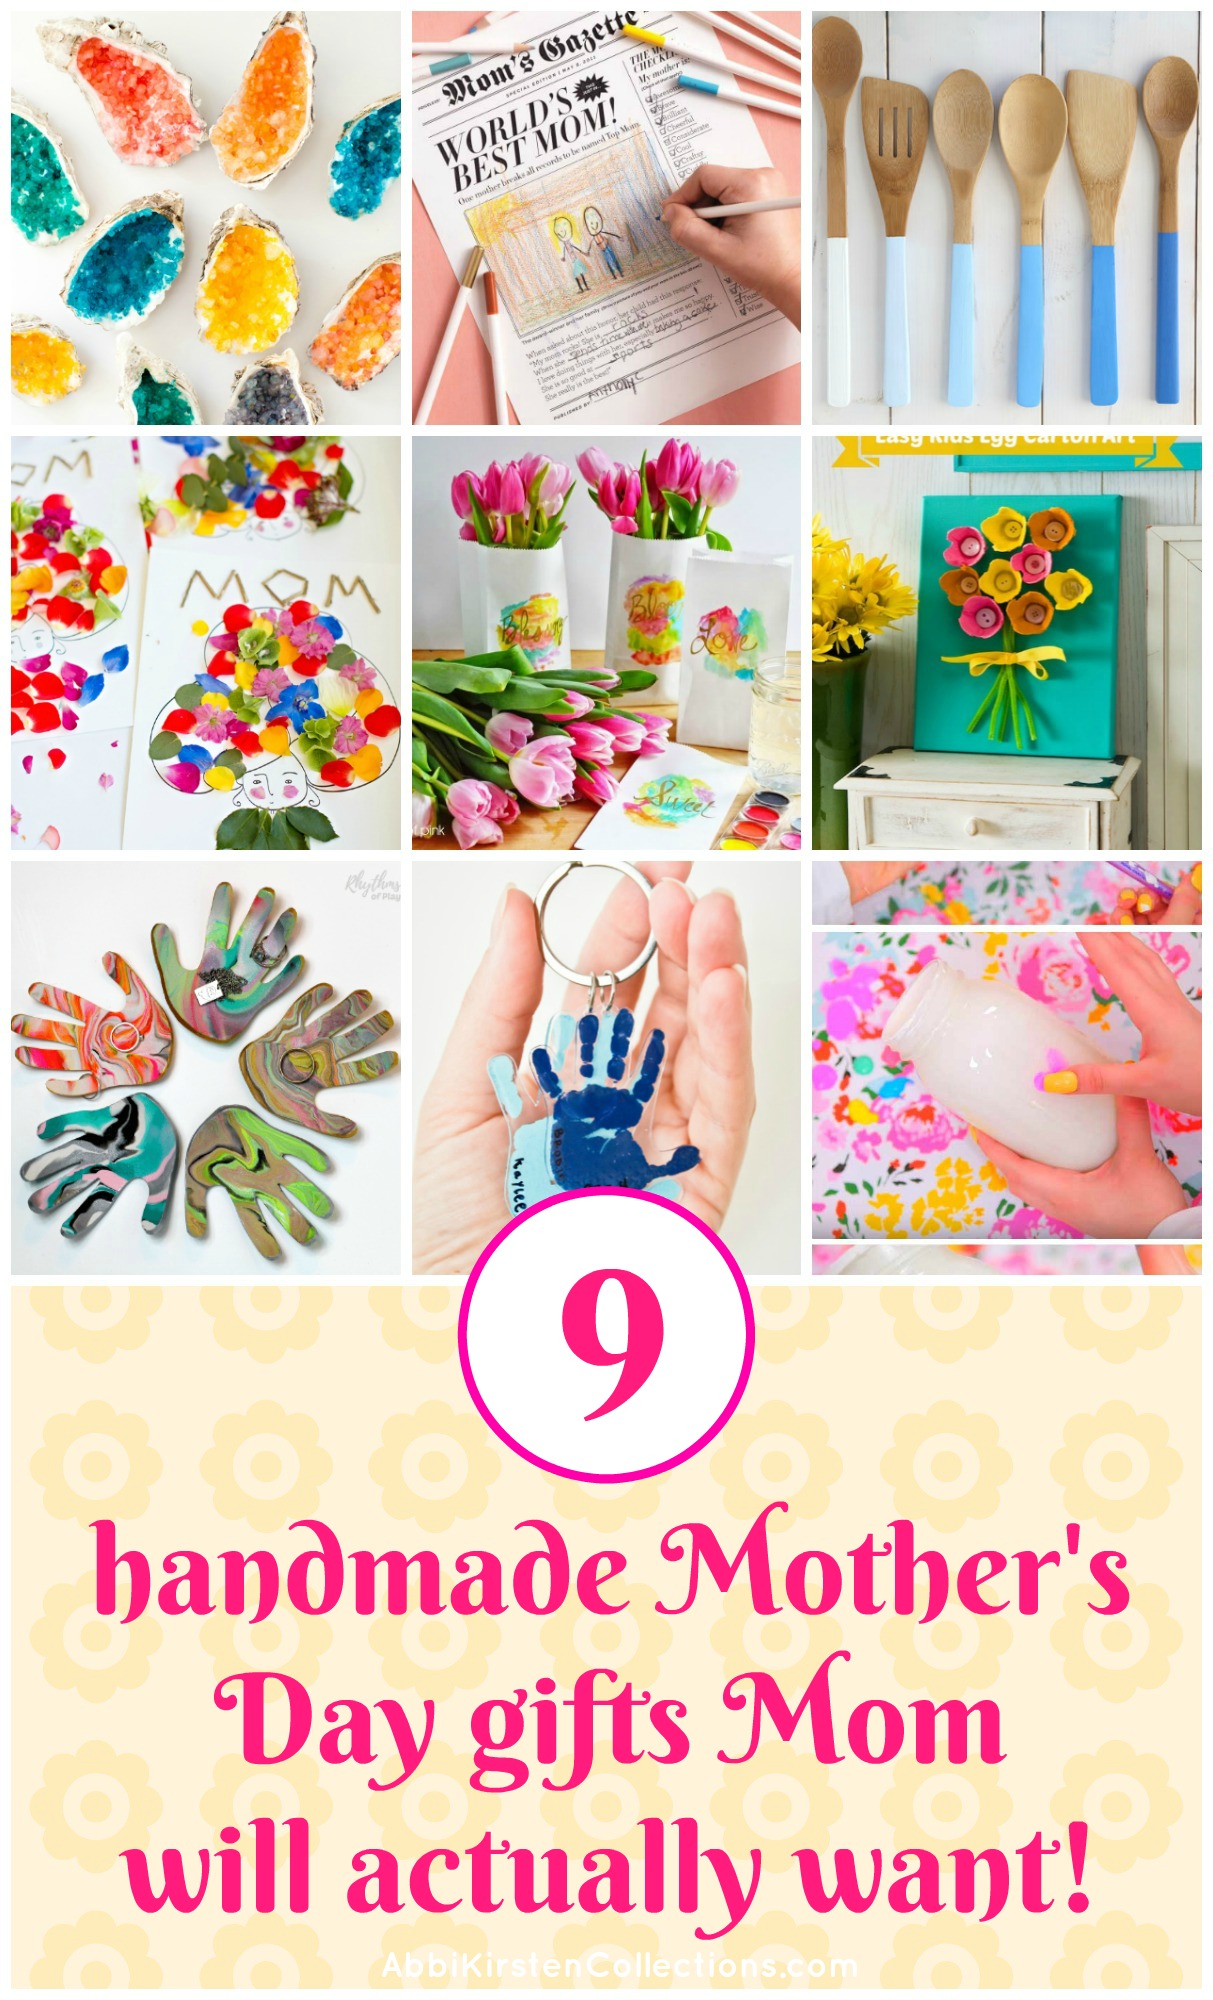 17 Mother's Day Gifts Kids Can Make | Keepsake crafts, Mothers day crafts,  Jewelry crafts